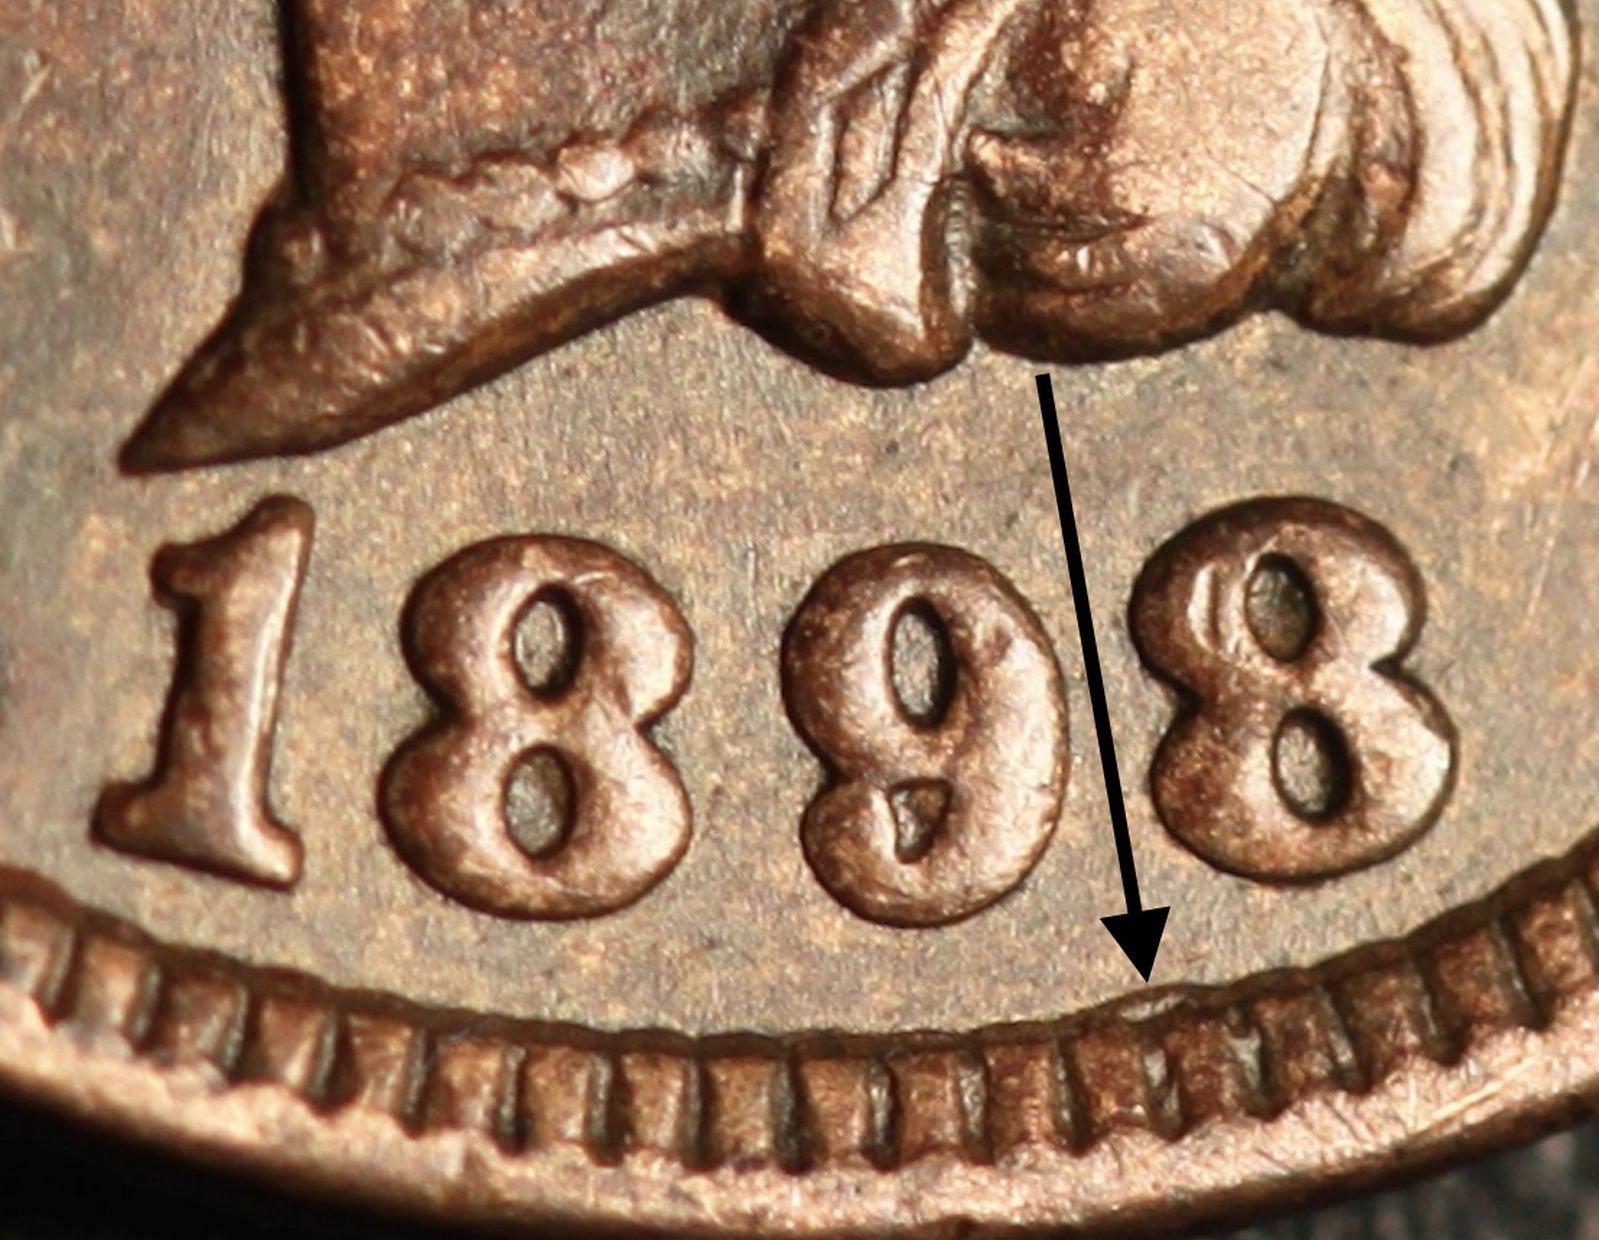 1898 MPD-004 - Indian Head Penny - Photo by Ed Nathanson